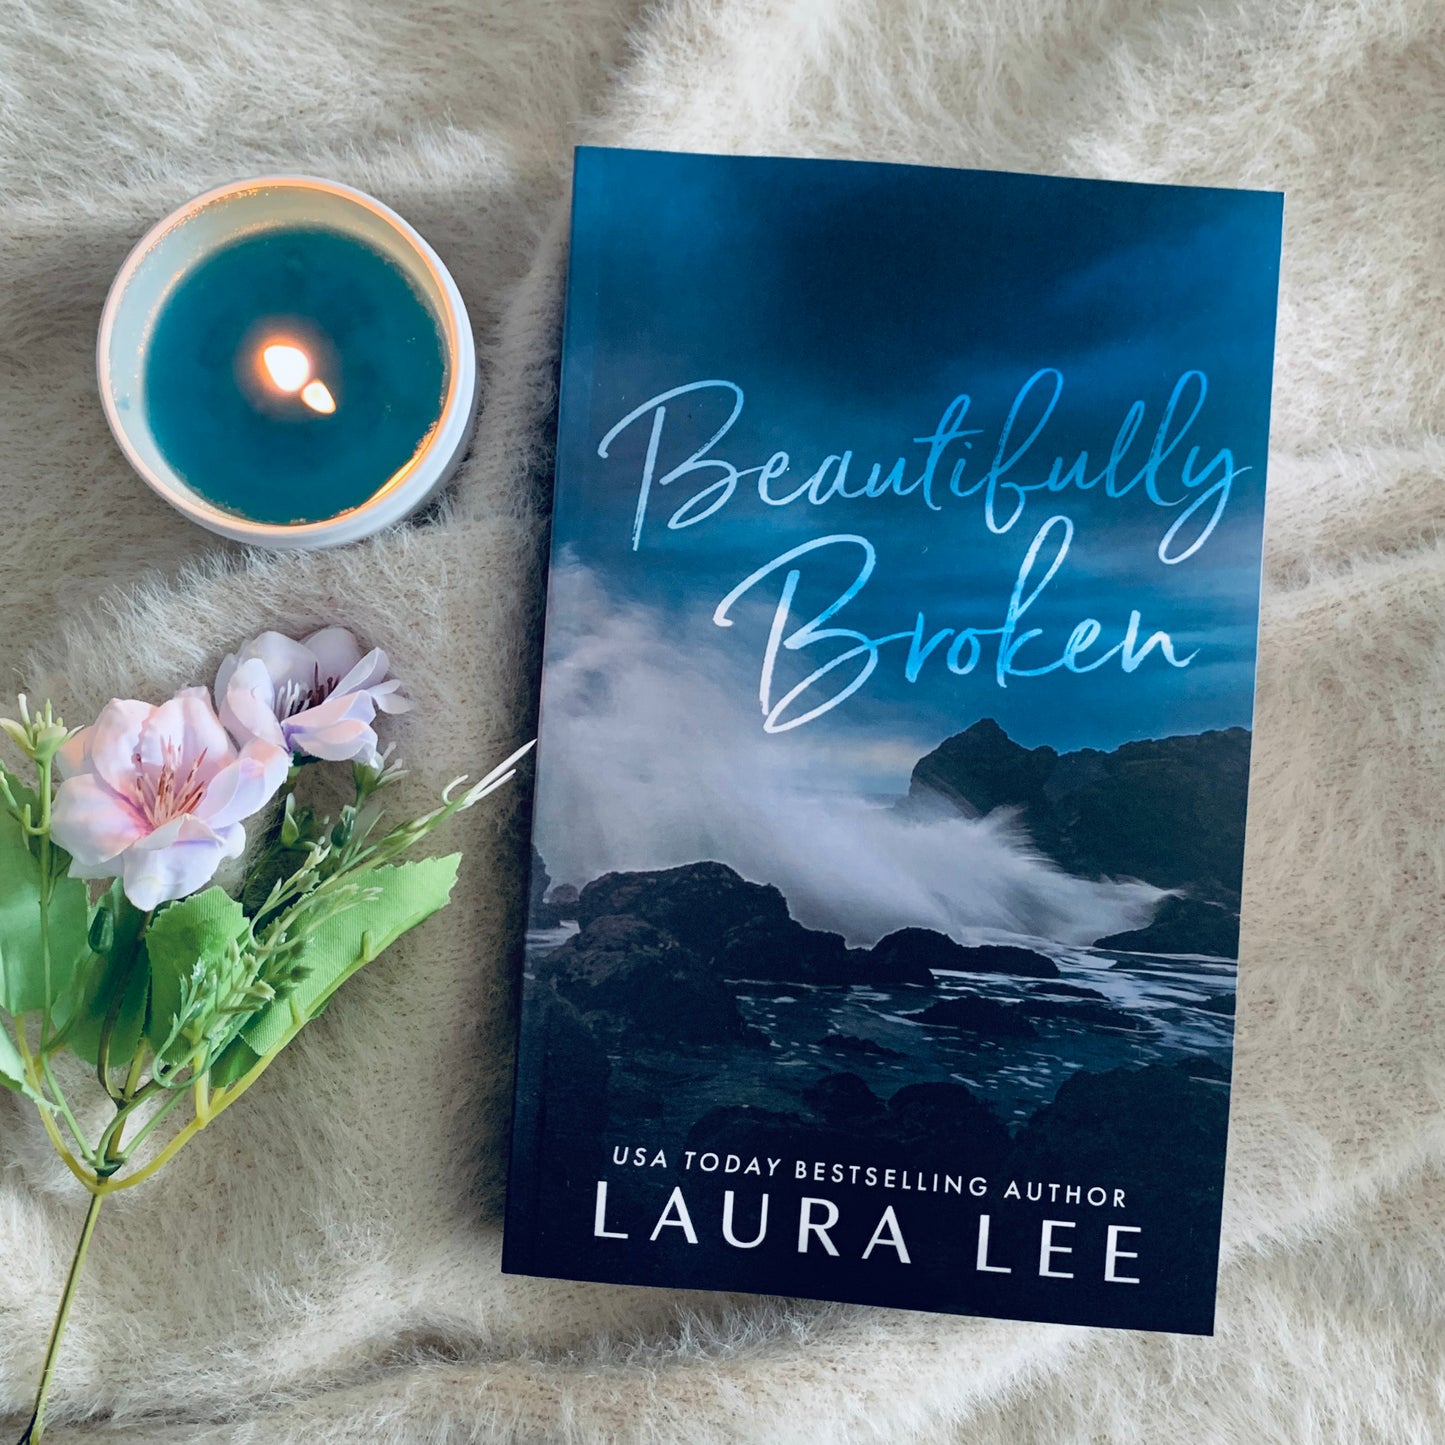 Beautifully Broken (Special Edition) by Laura Lee